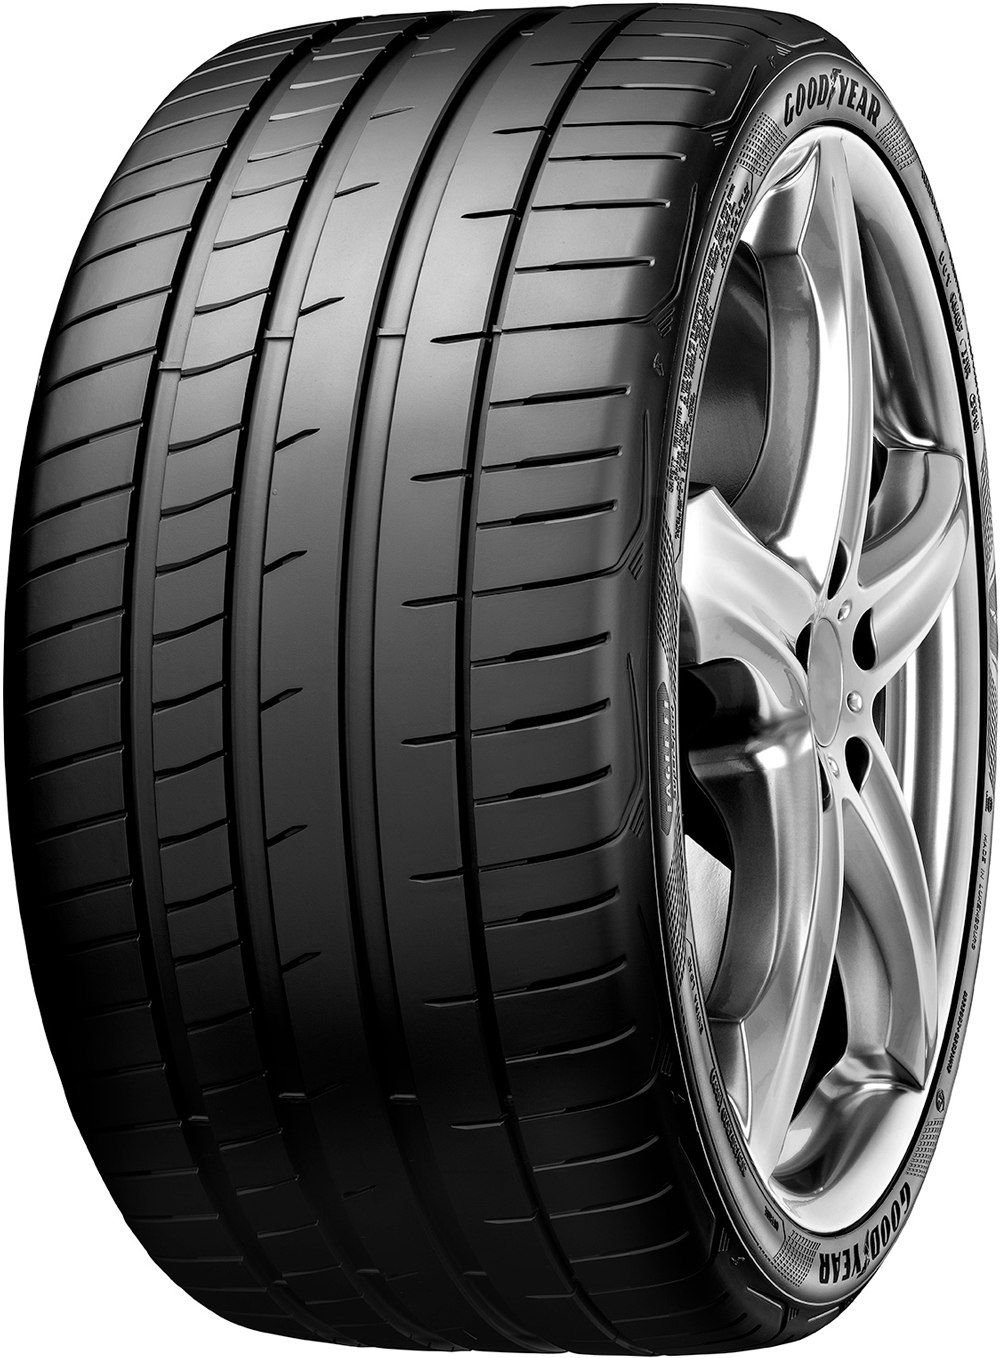 Anvelope auto GOODYEAR Eagle Supersport XL FP 285/30 R19 98Y